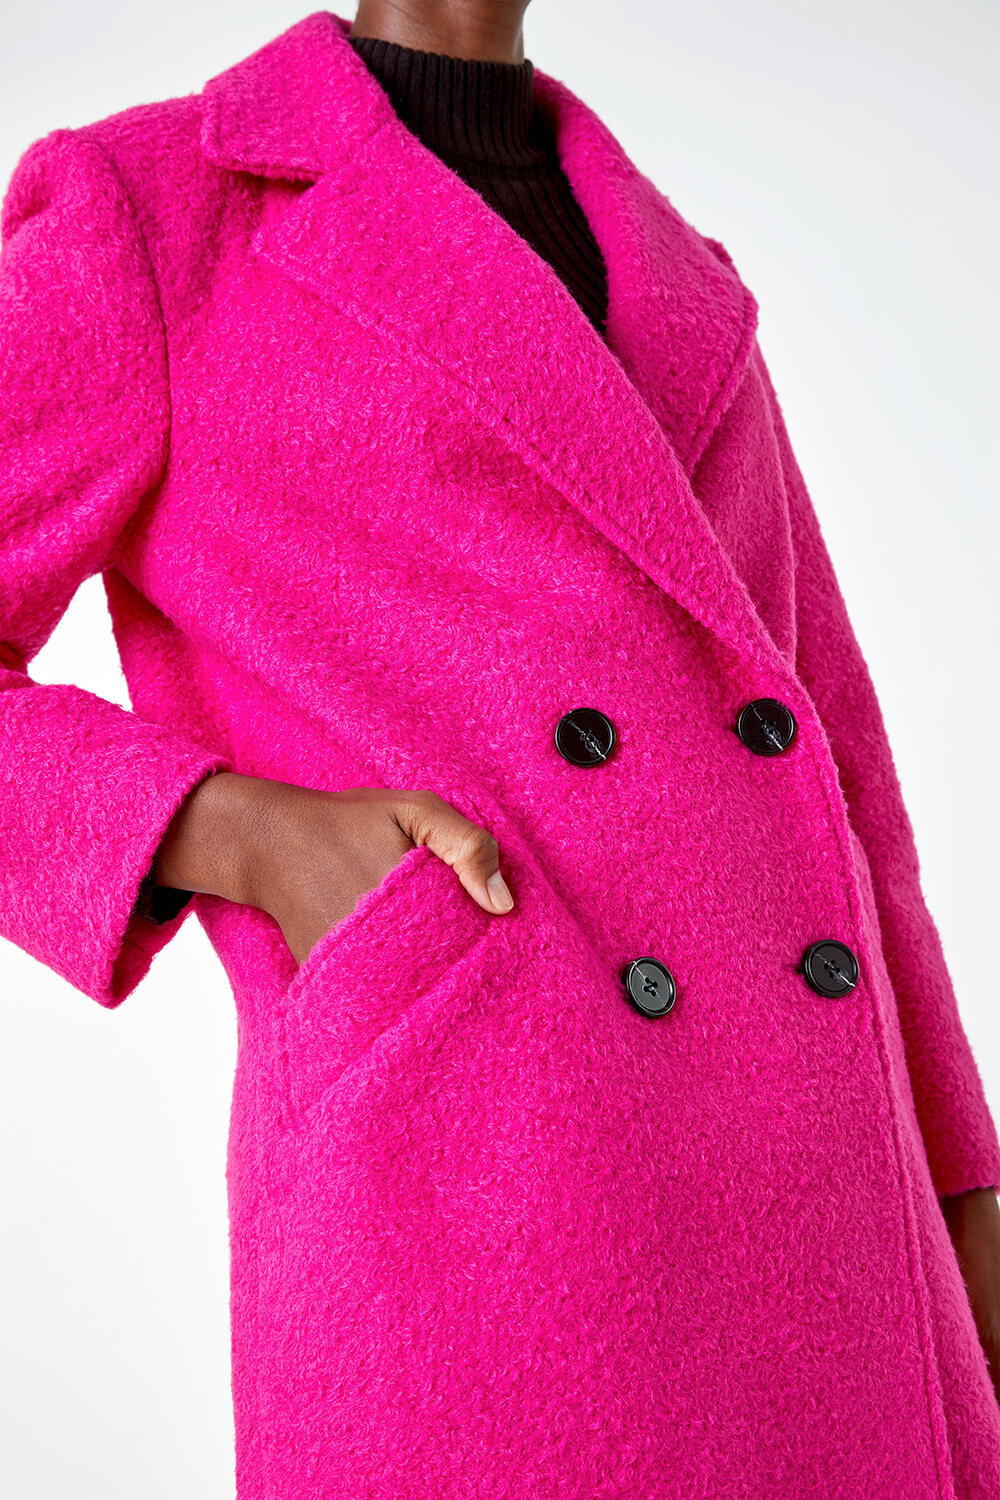 CERISE Relaxed Double Breasted Boucle Coat, Image 5 of 5